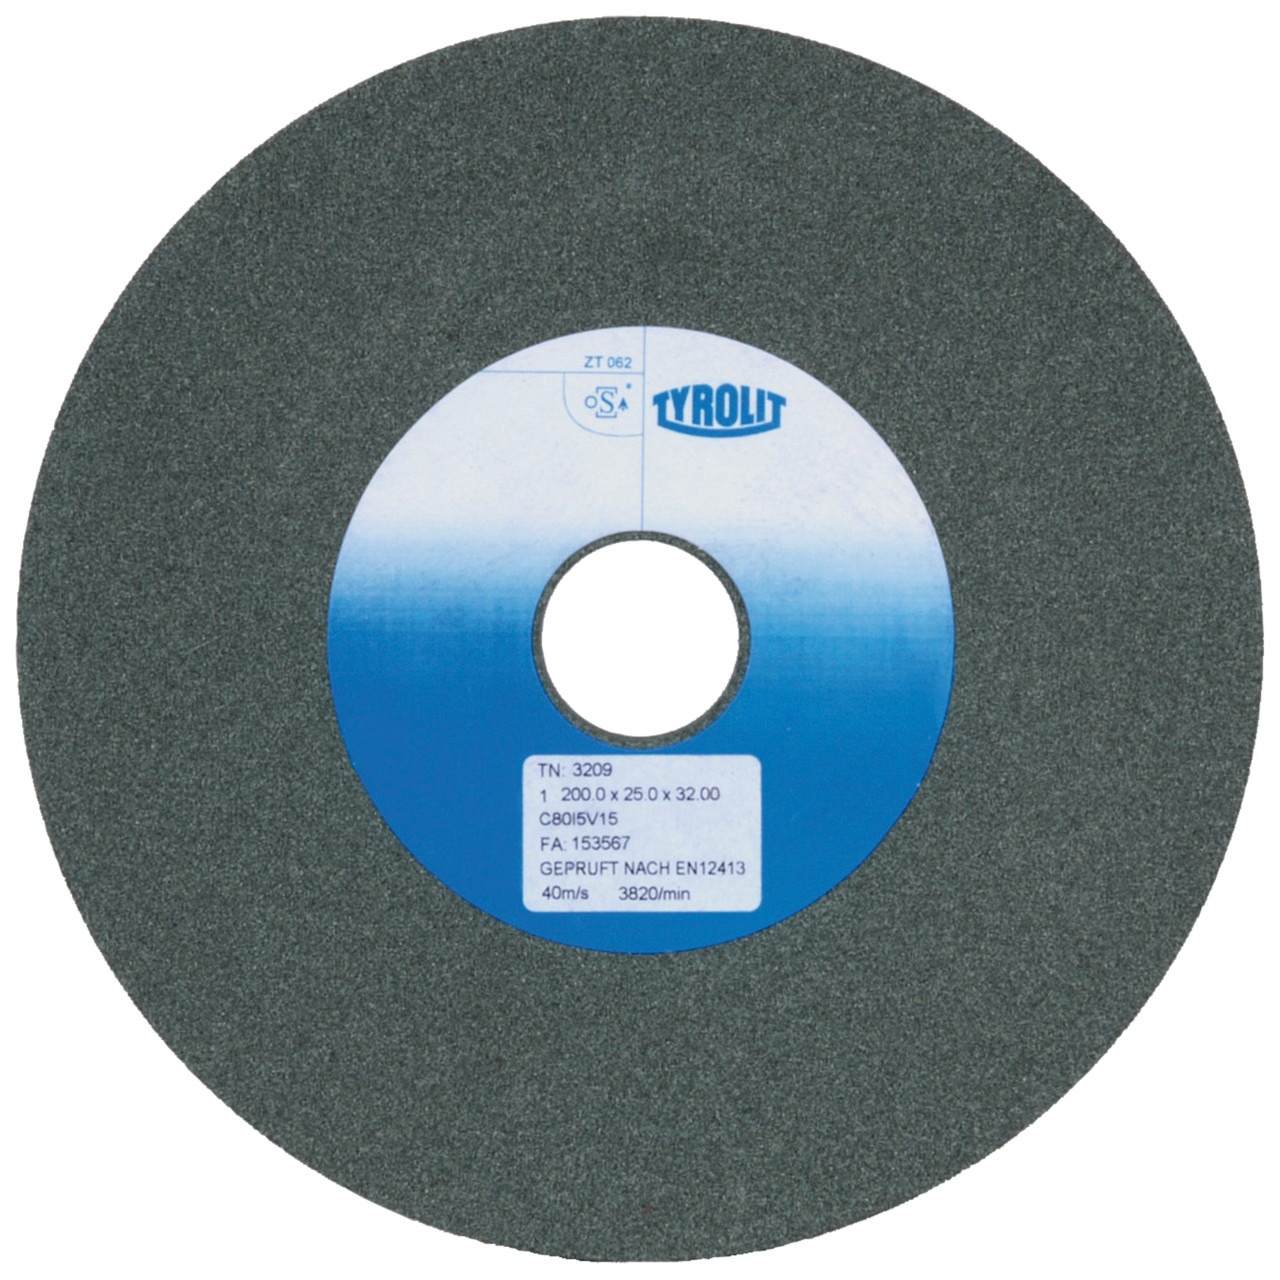 Tyrolit Conventional ceramic grinding discs DxDxH 300x40x51 For carbide and cast iron, shape: 1, Art. 822624